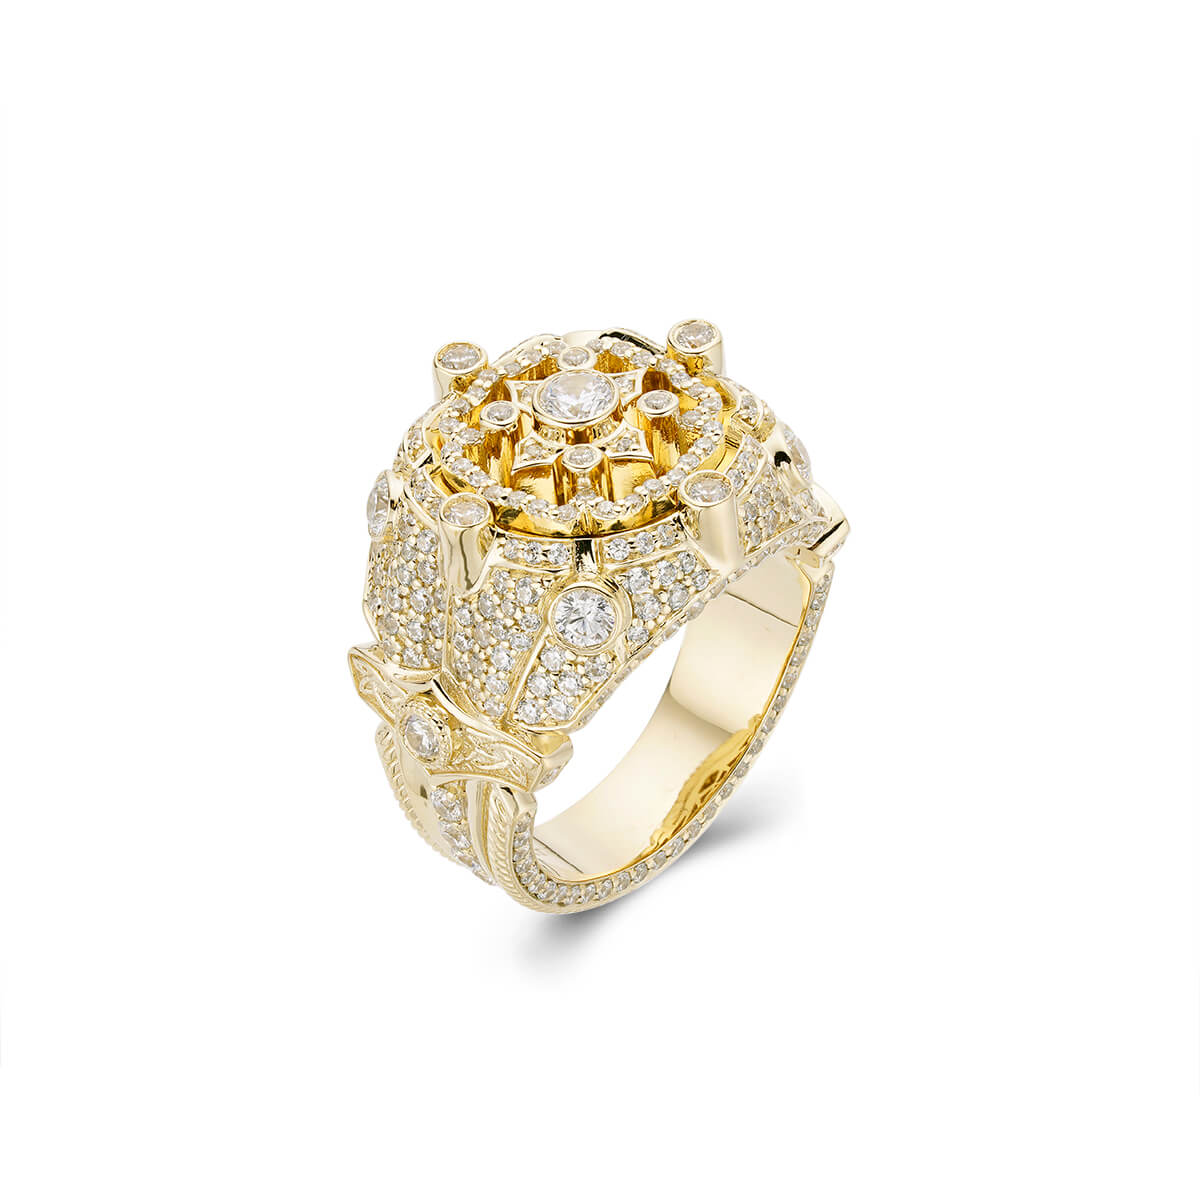 A Man's Guide to Choosing the Perfect Gold Ring